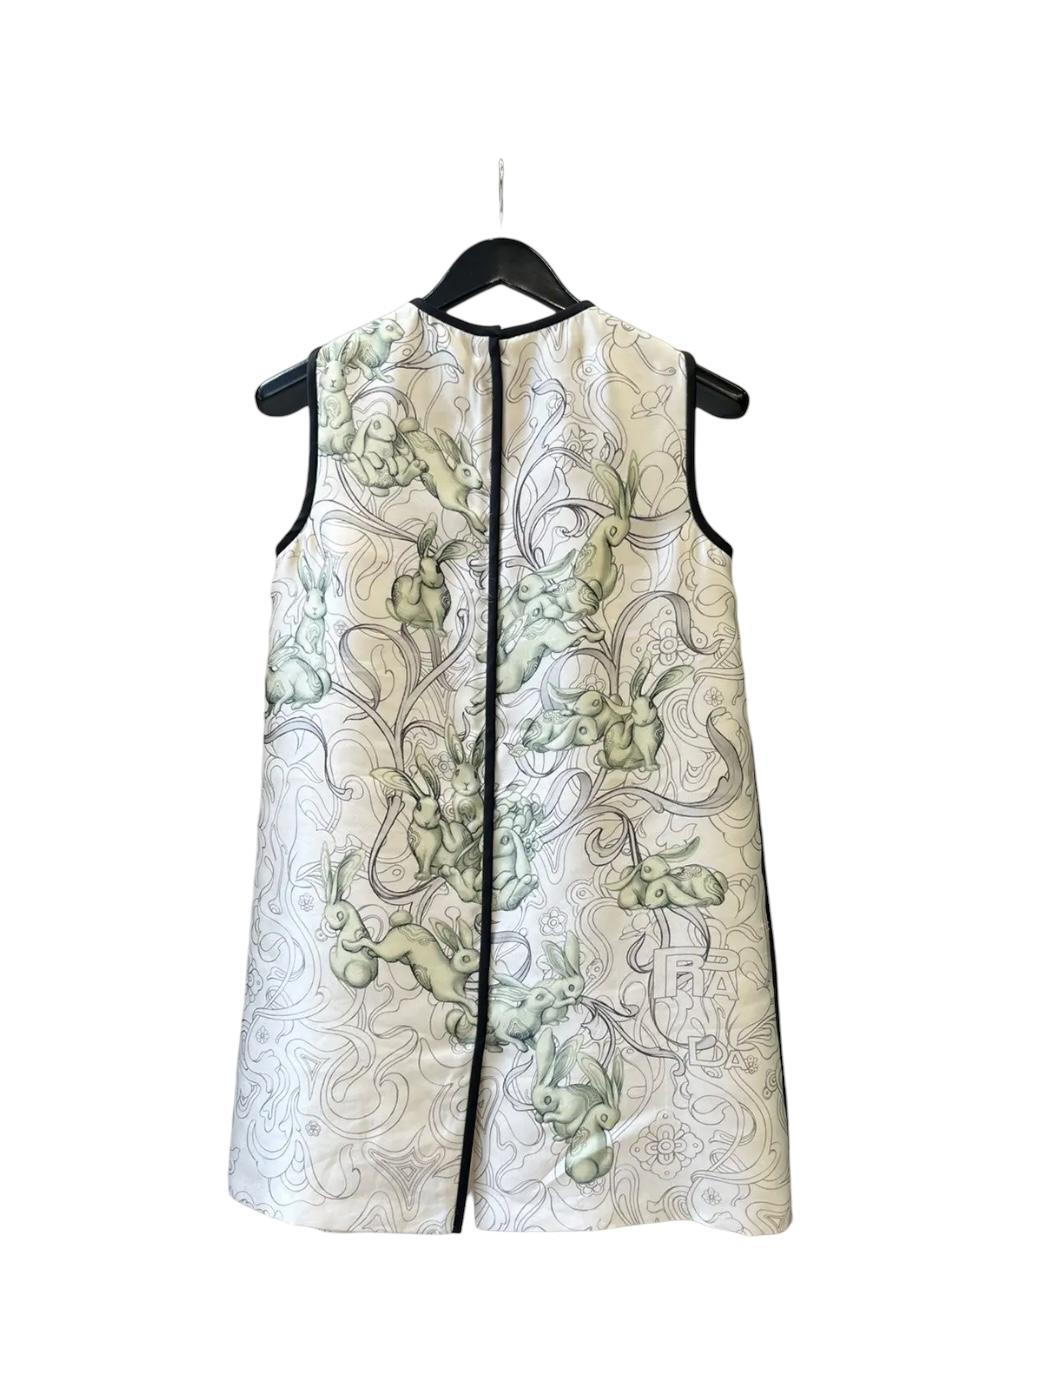 Prada
2017 Rabbit A-Line Silk Dress
Size IT 42

Beautiful Prada 2017 rabbit a-line silk dress in a size IT 42. In great condition without flaws, made in Italy.